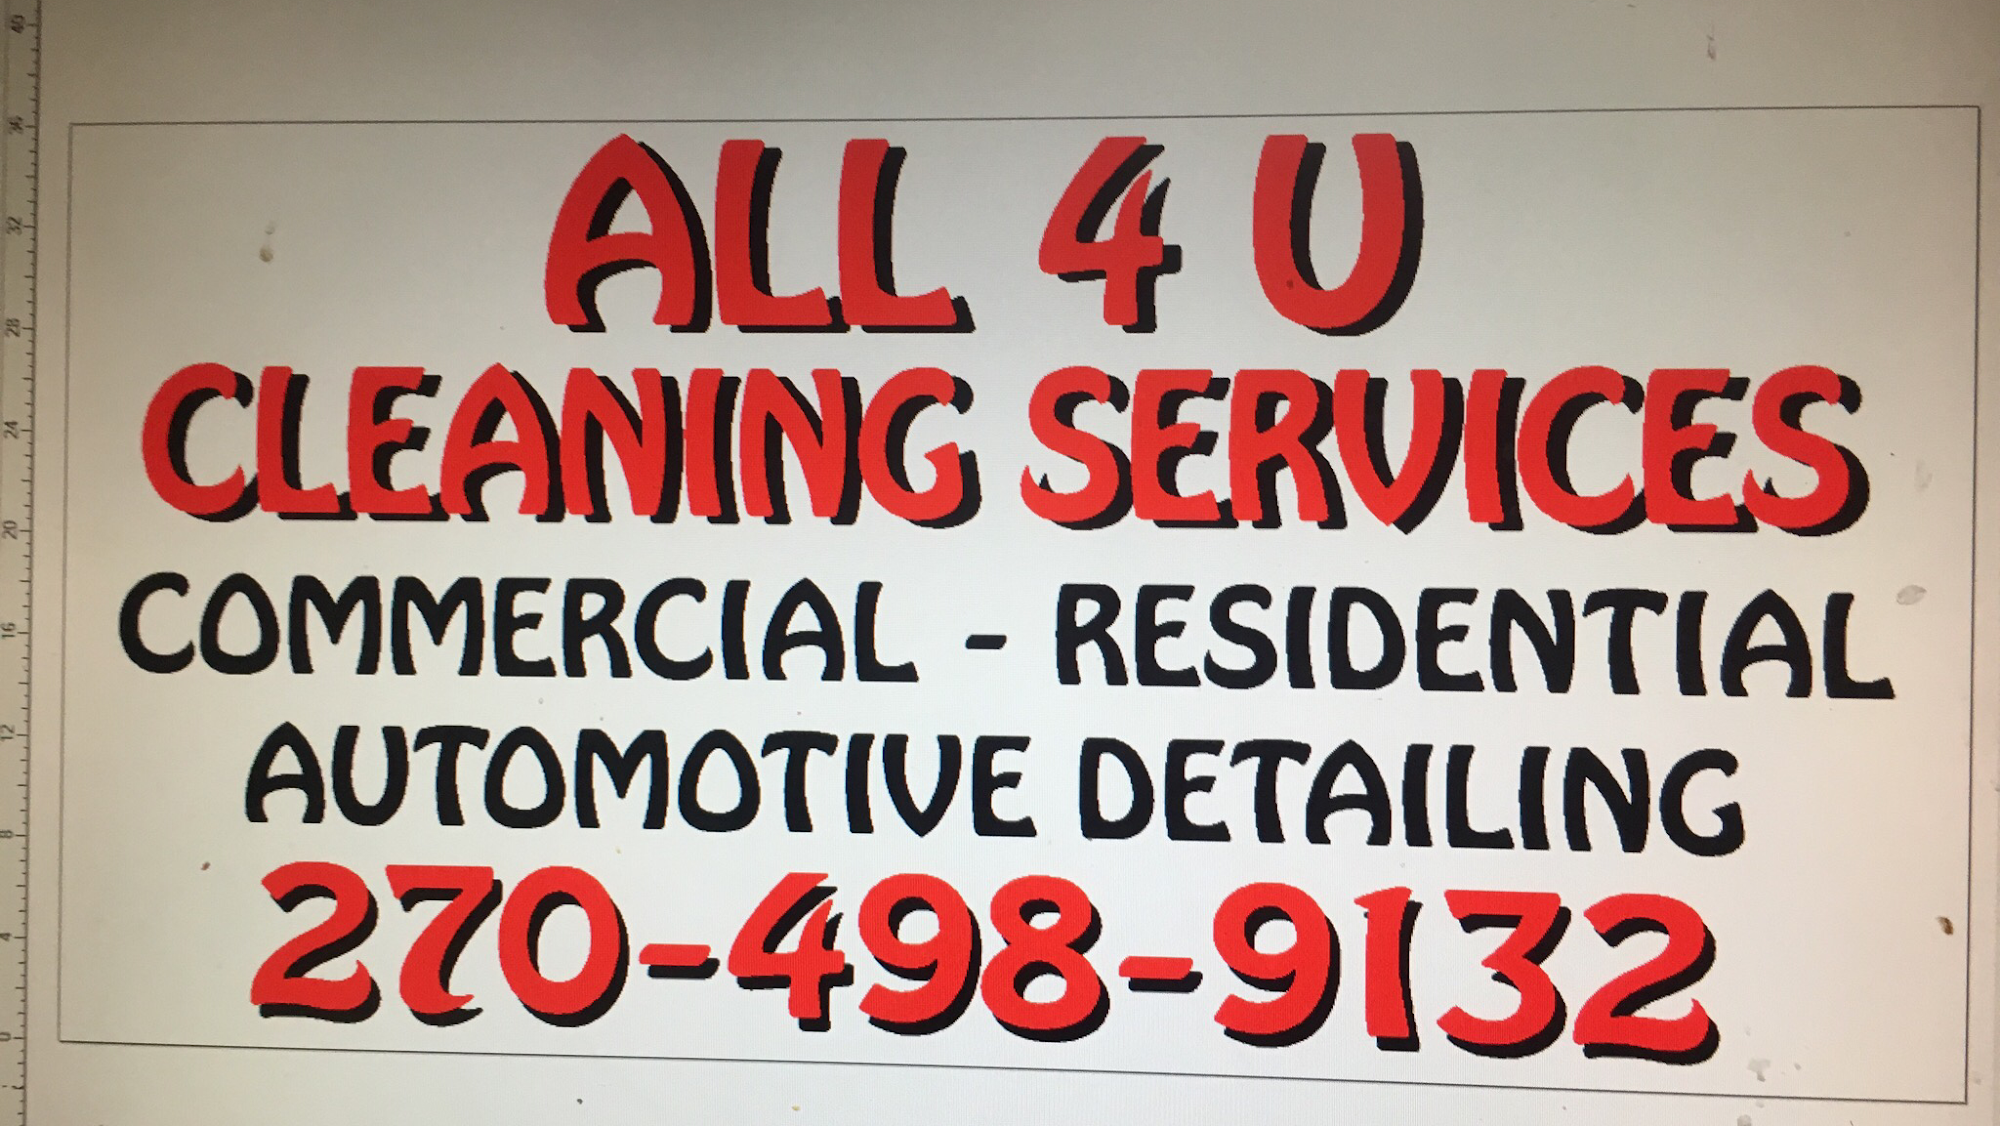 All 4 U cleaning carpet cleaning and janitorial services